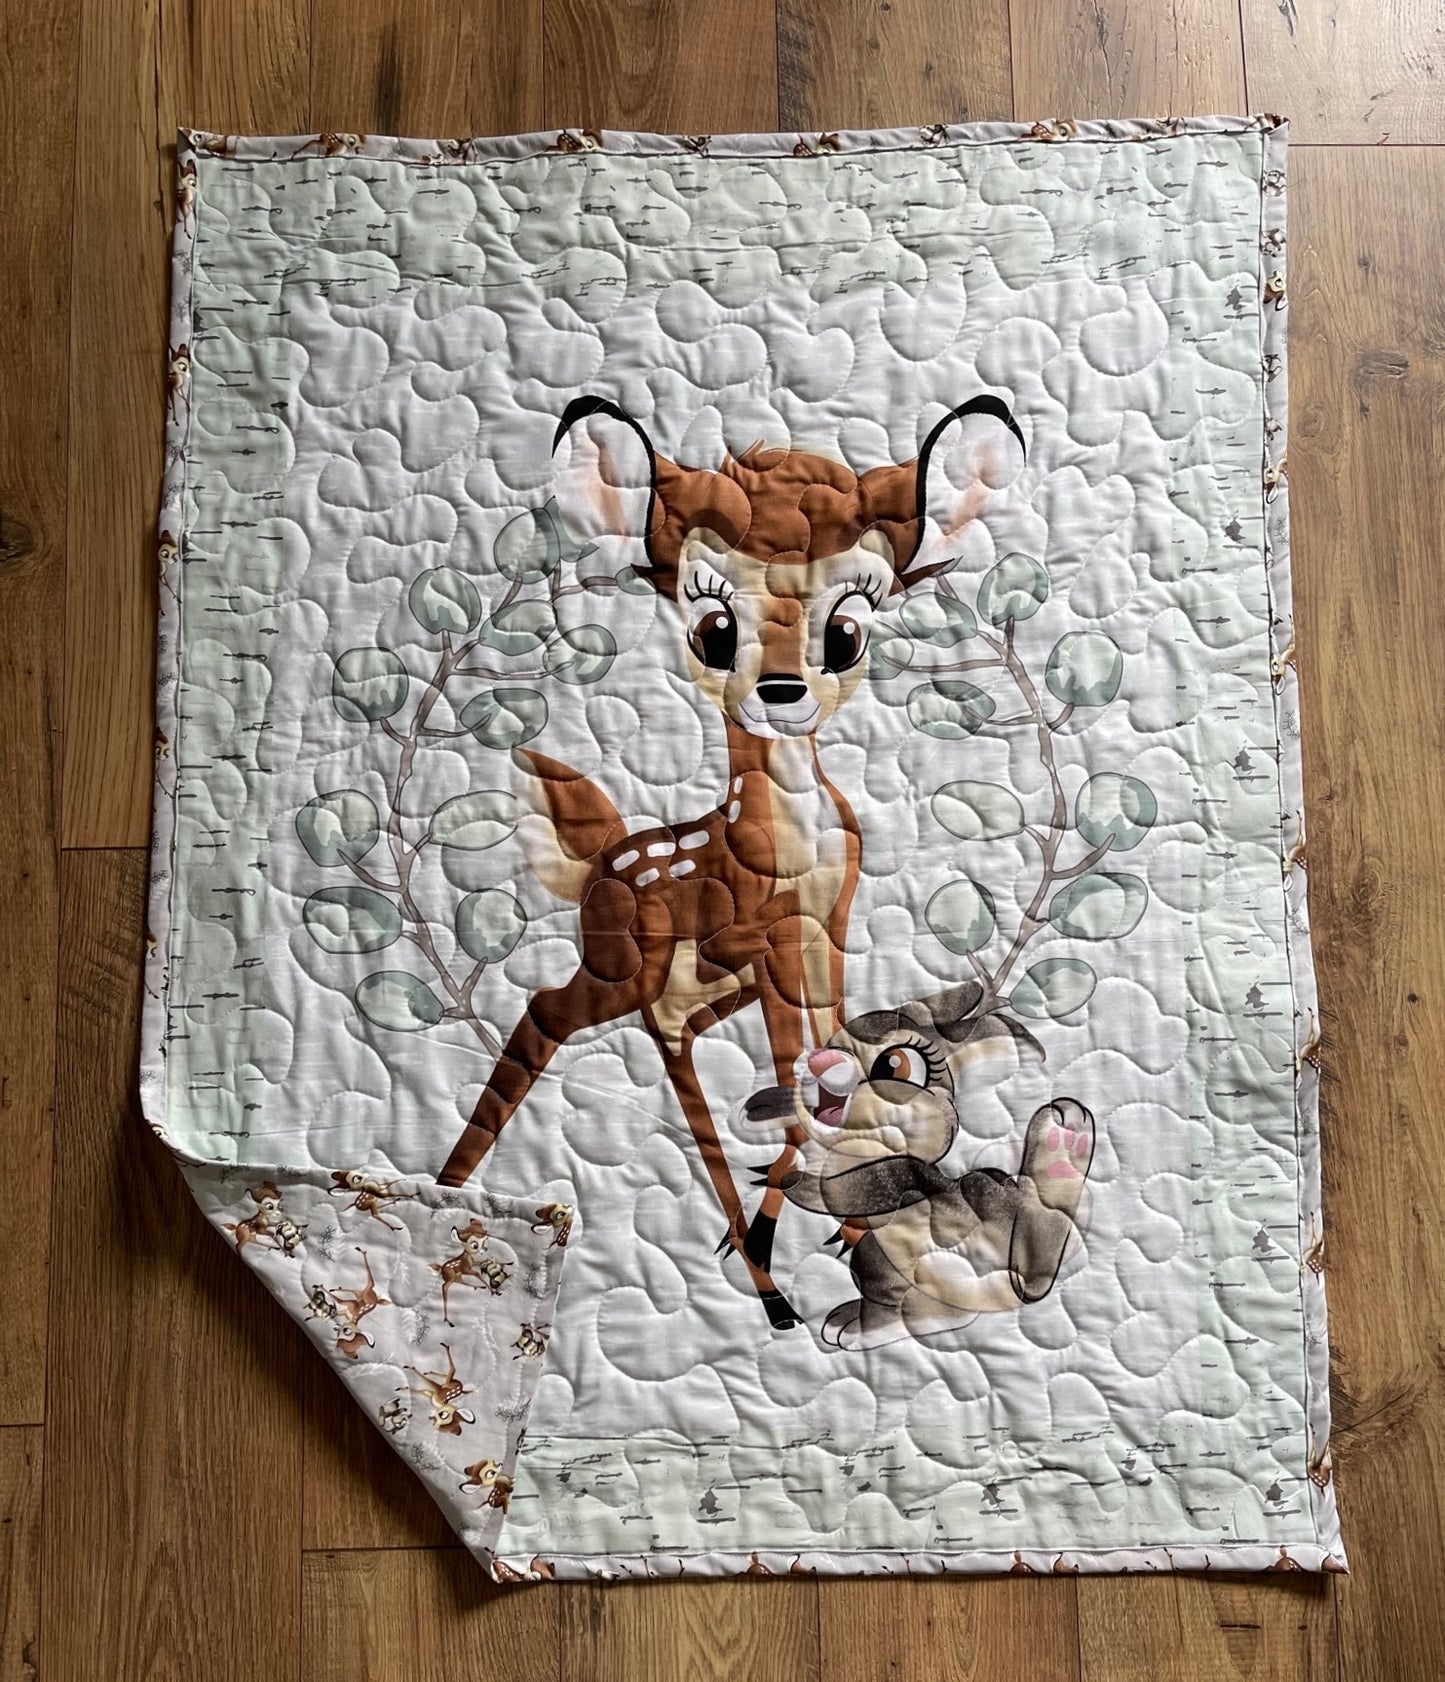 BAMBI THUMPER Inspired Quilted Blanket 36"X44" Bambi nursery to adult lap blanket